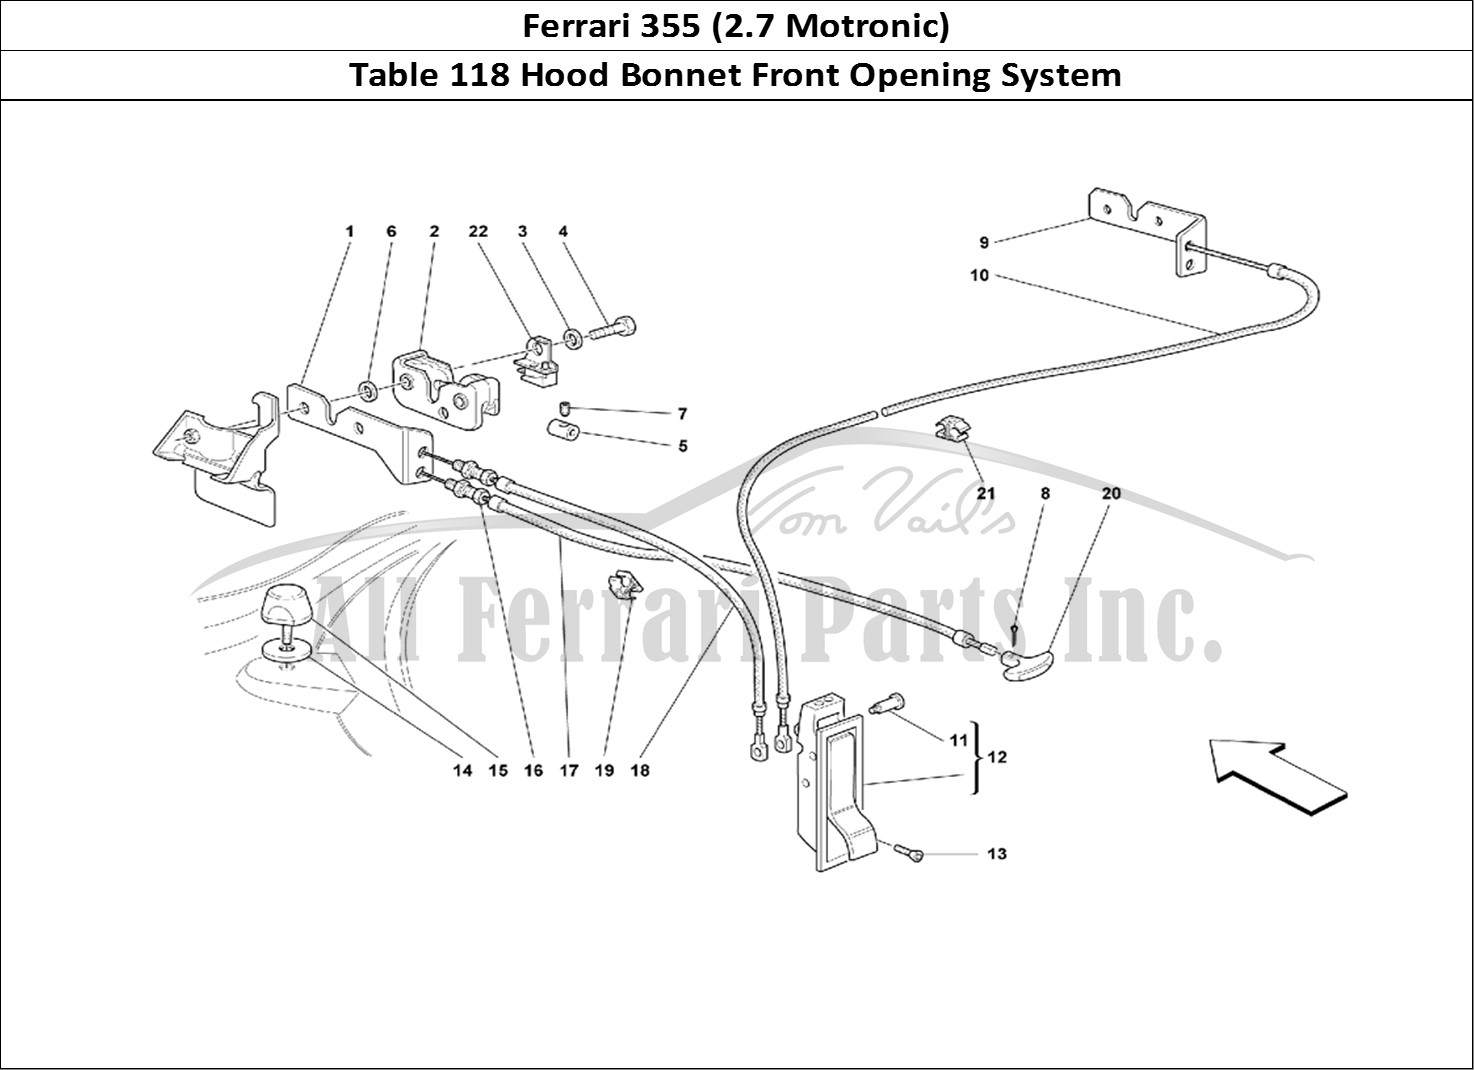 Ferrari Parts Ferrari 355 (2.7 Motronic) Page 118 Opening Device for Front